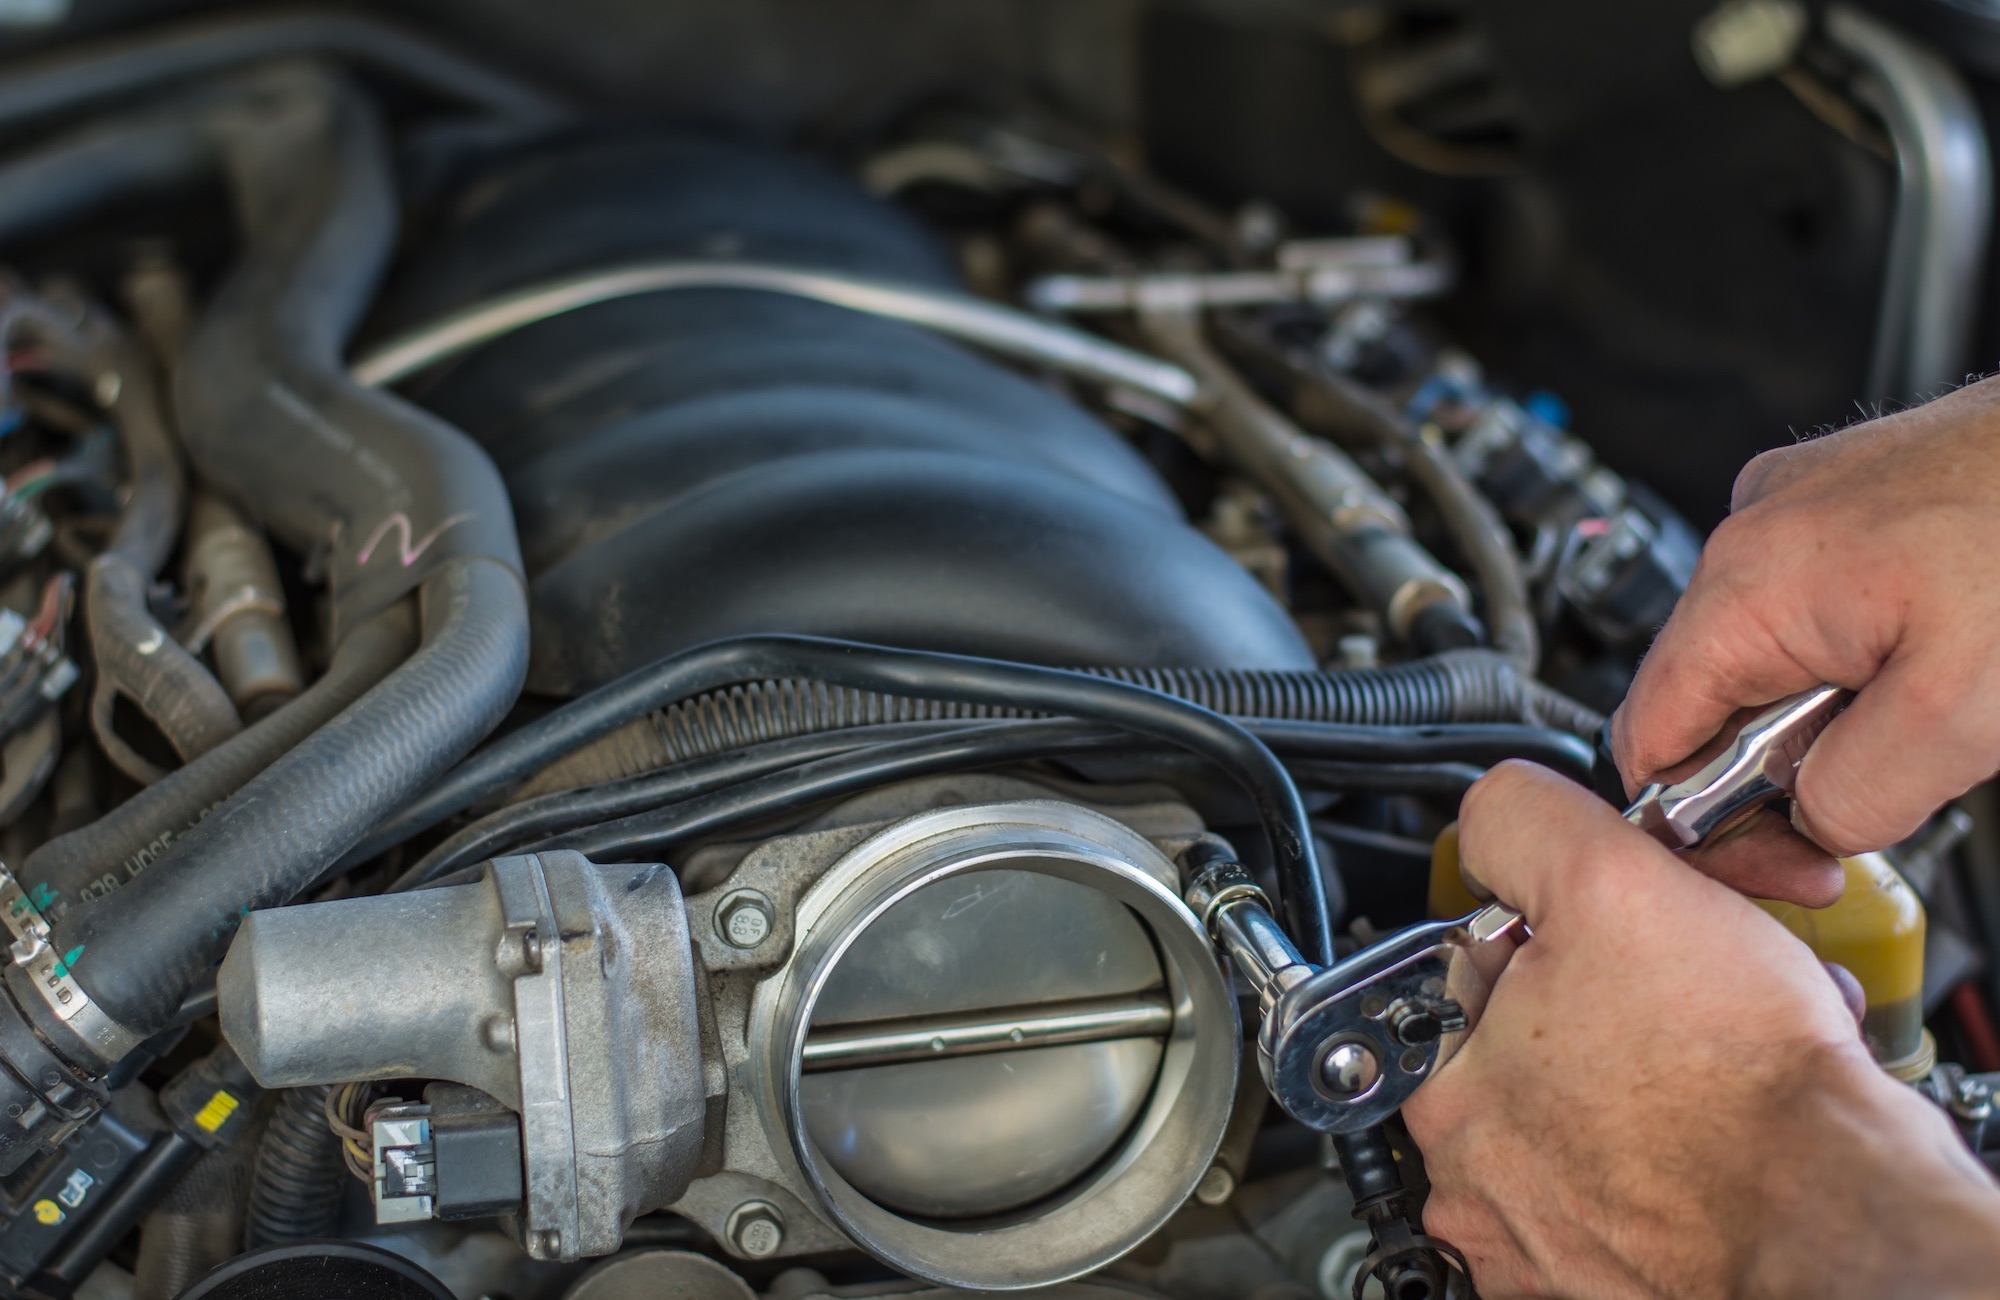 How Do You Know If Your Throttle Position Sensor Is Working?